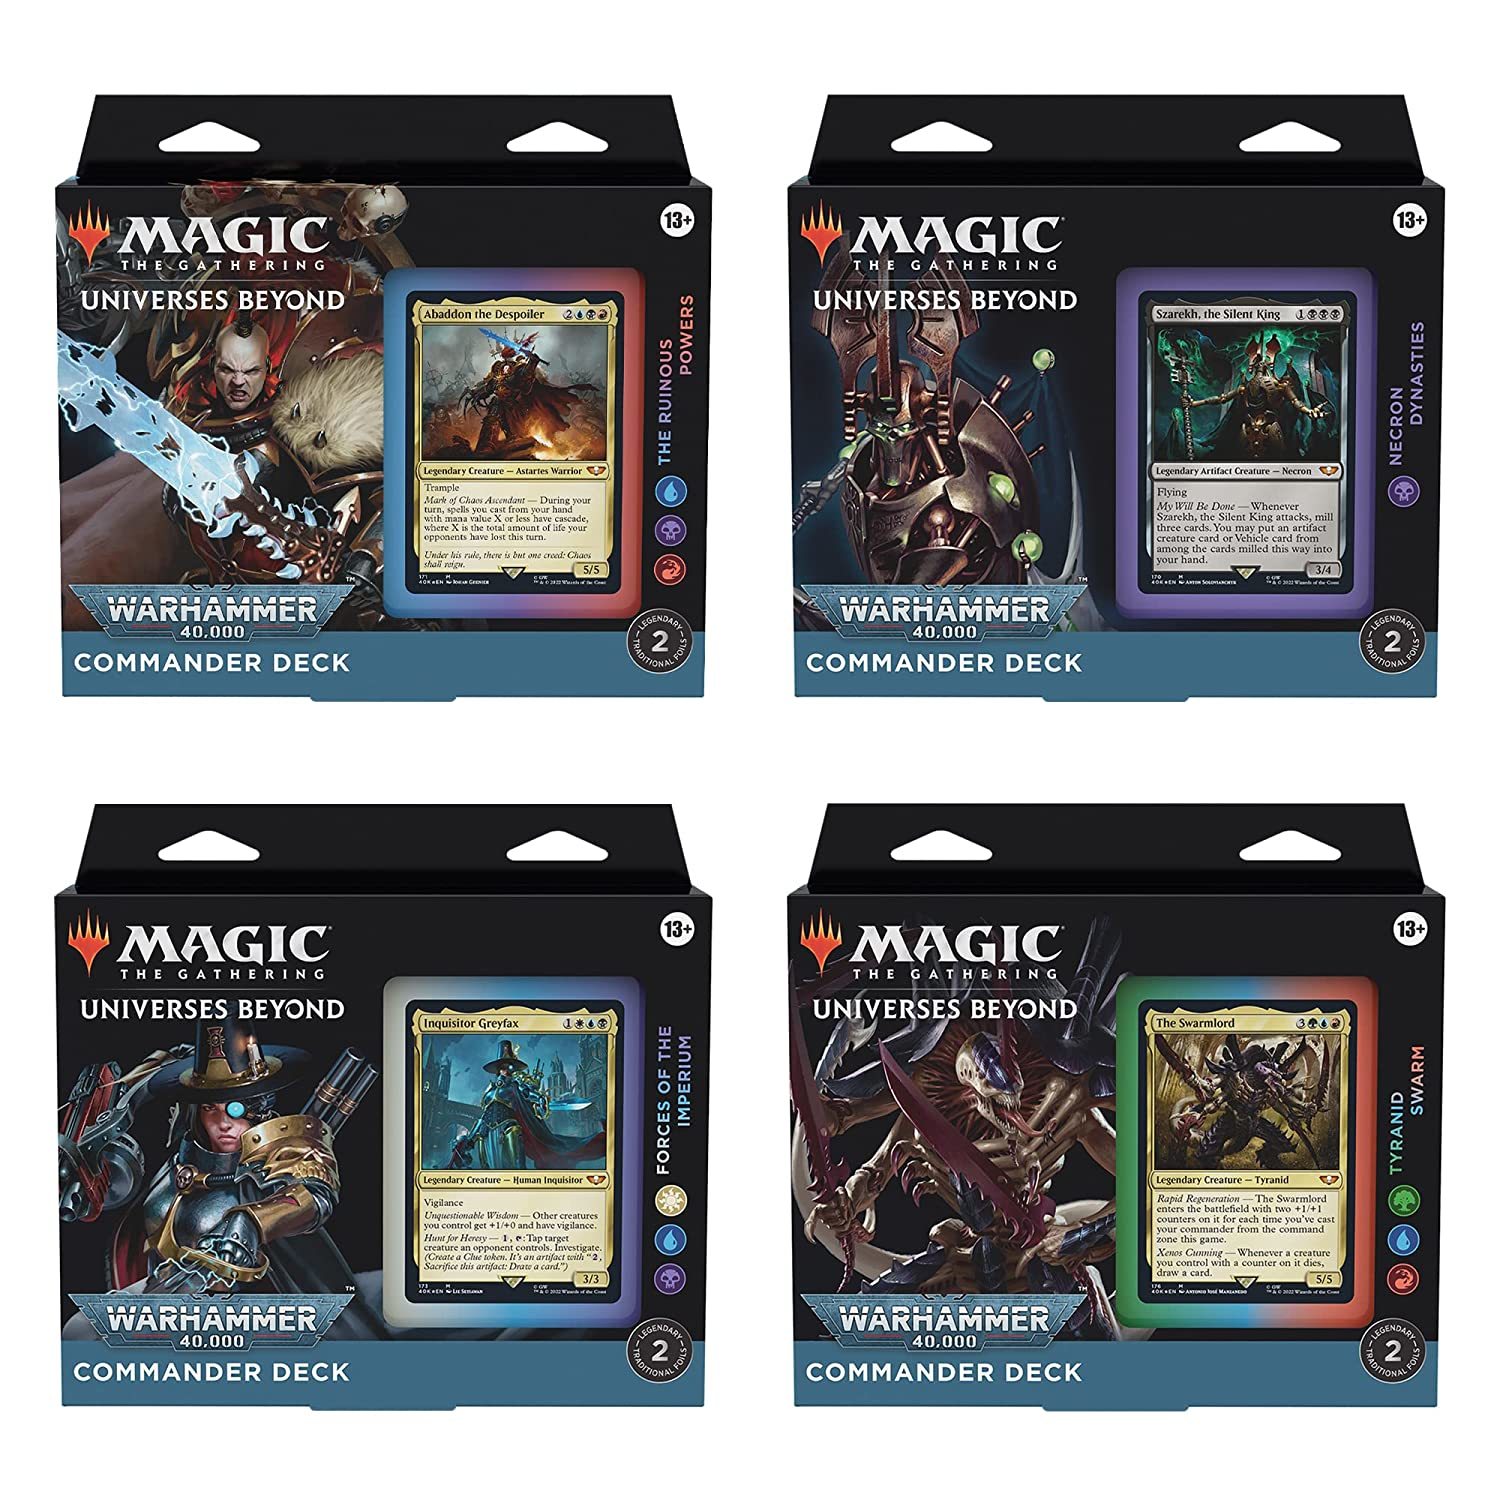 Primary image for Magic: The Gathering Universes Beyond Warhammer 40,000 Commander Deck Bundle  In